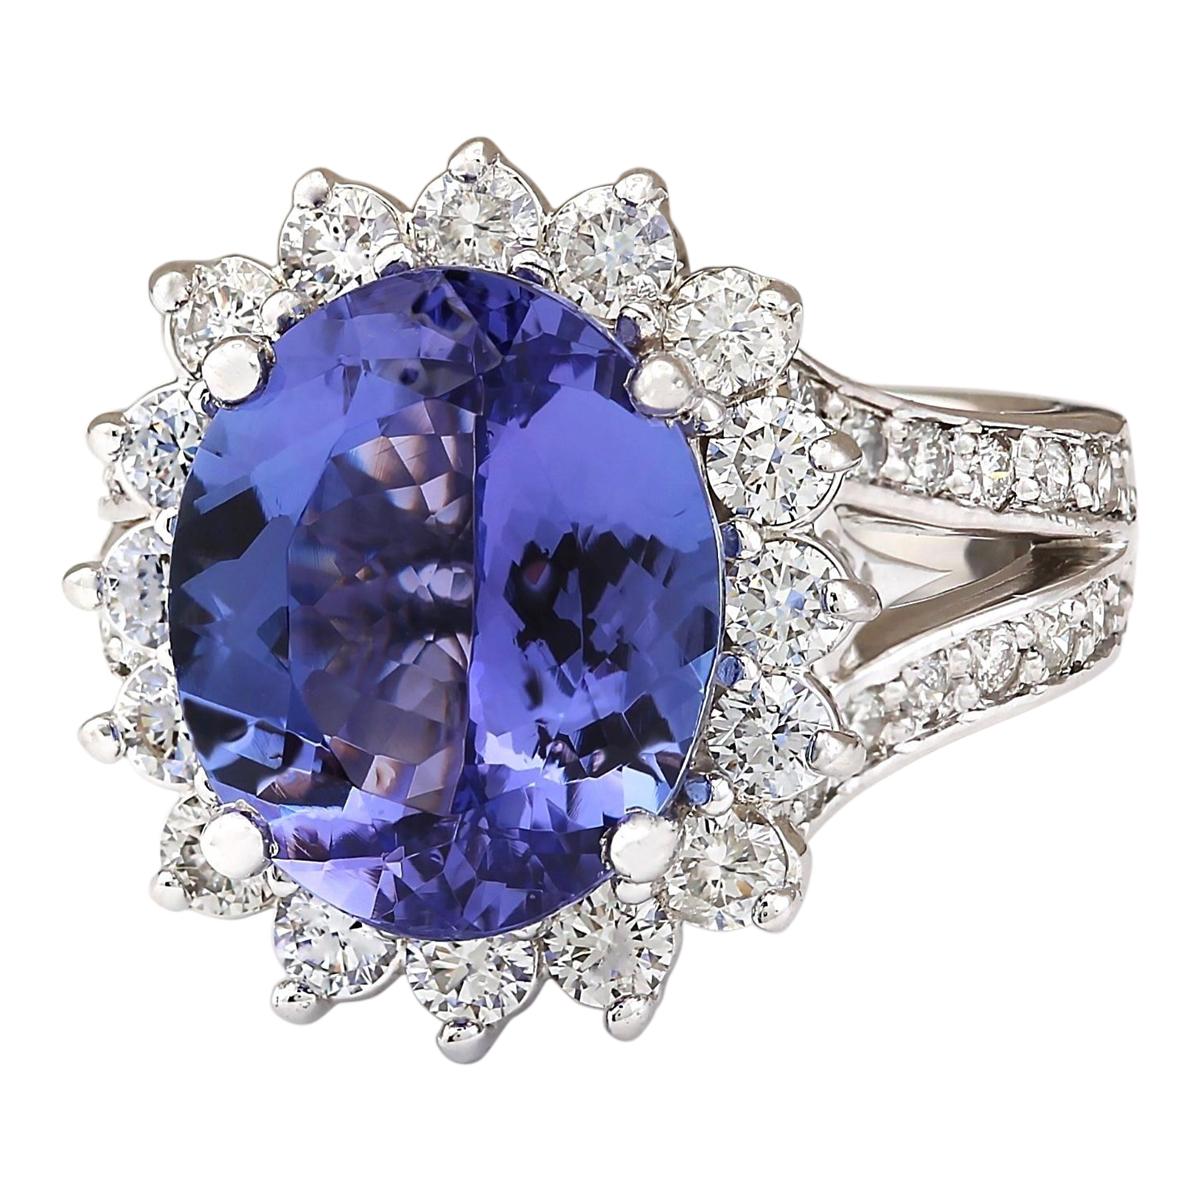 Indulge in timeless sophistication with our 7.33 Carat Tanzanite Ring, crafted in exquisite 14K White Gold. At its heart lies a captivating tanzanite, weighing 5.93 carats and measuring 13.00x11.00 mm. Accentuated by shimmering diamonds totaling